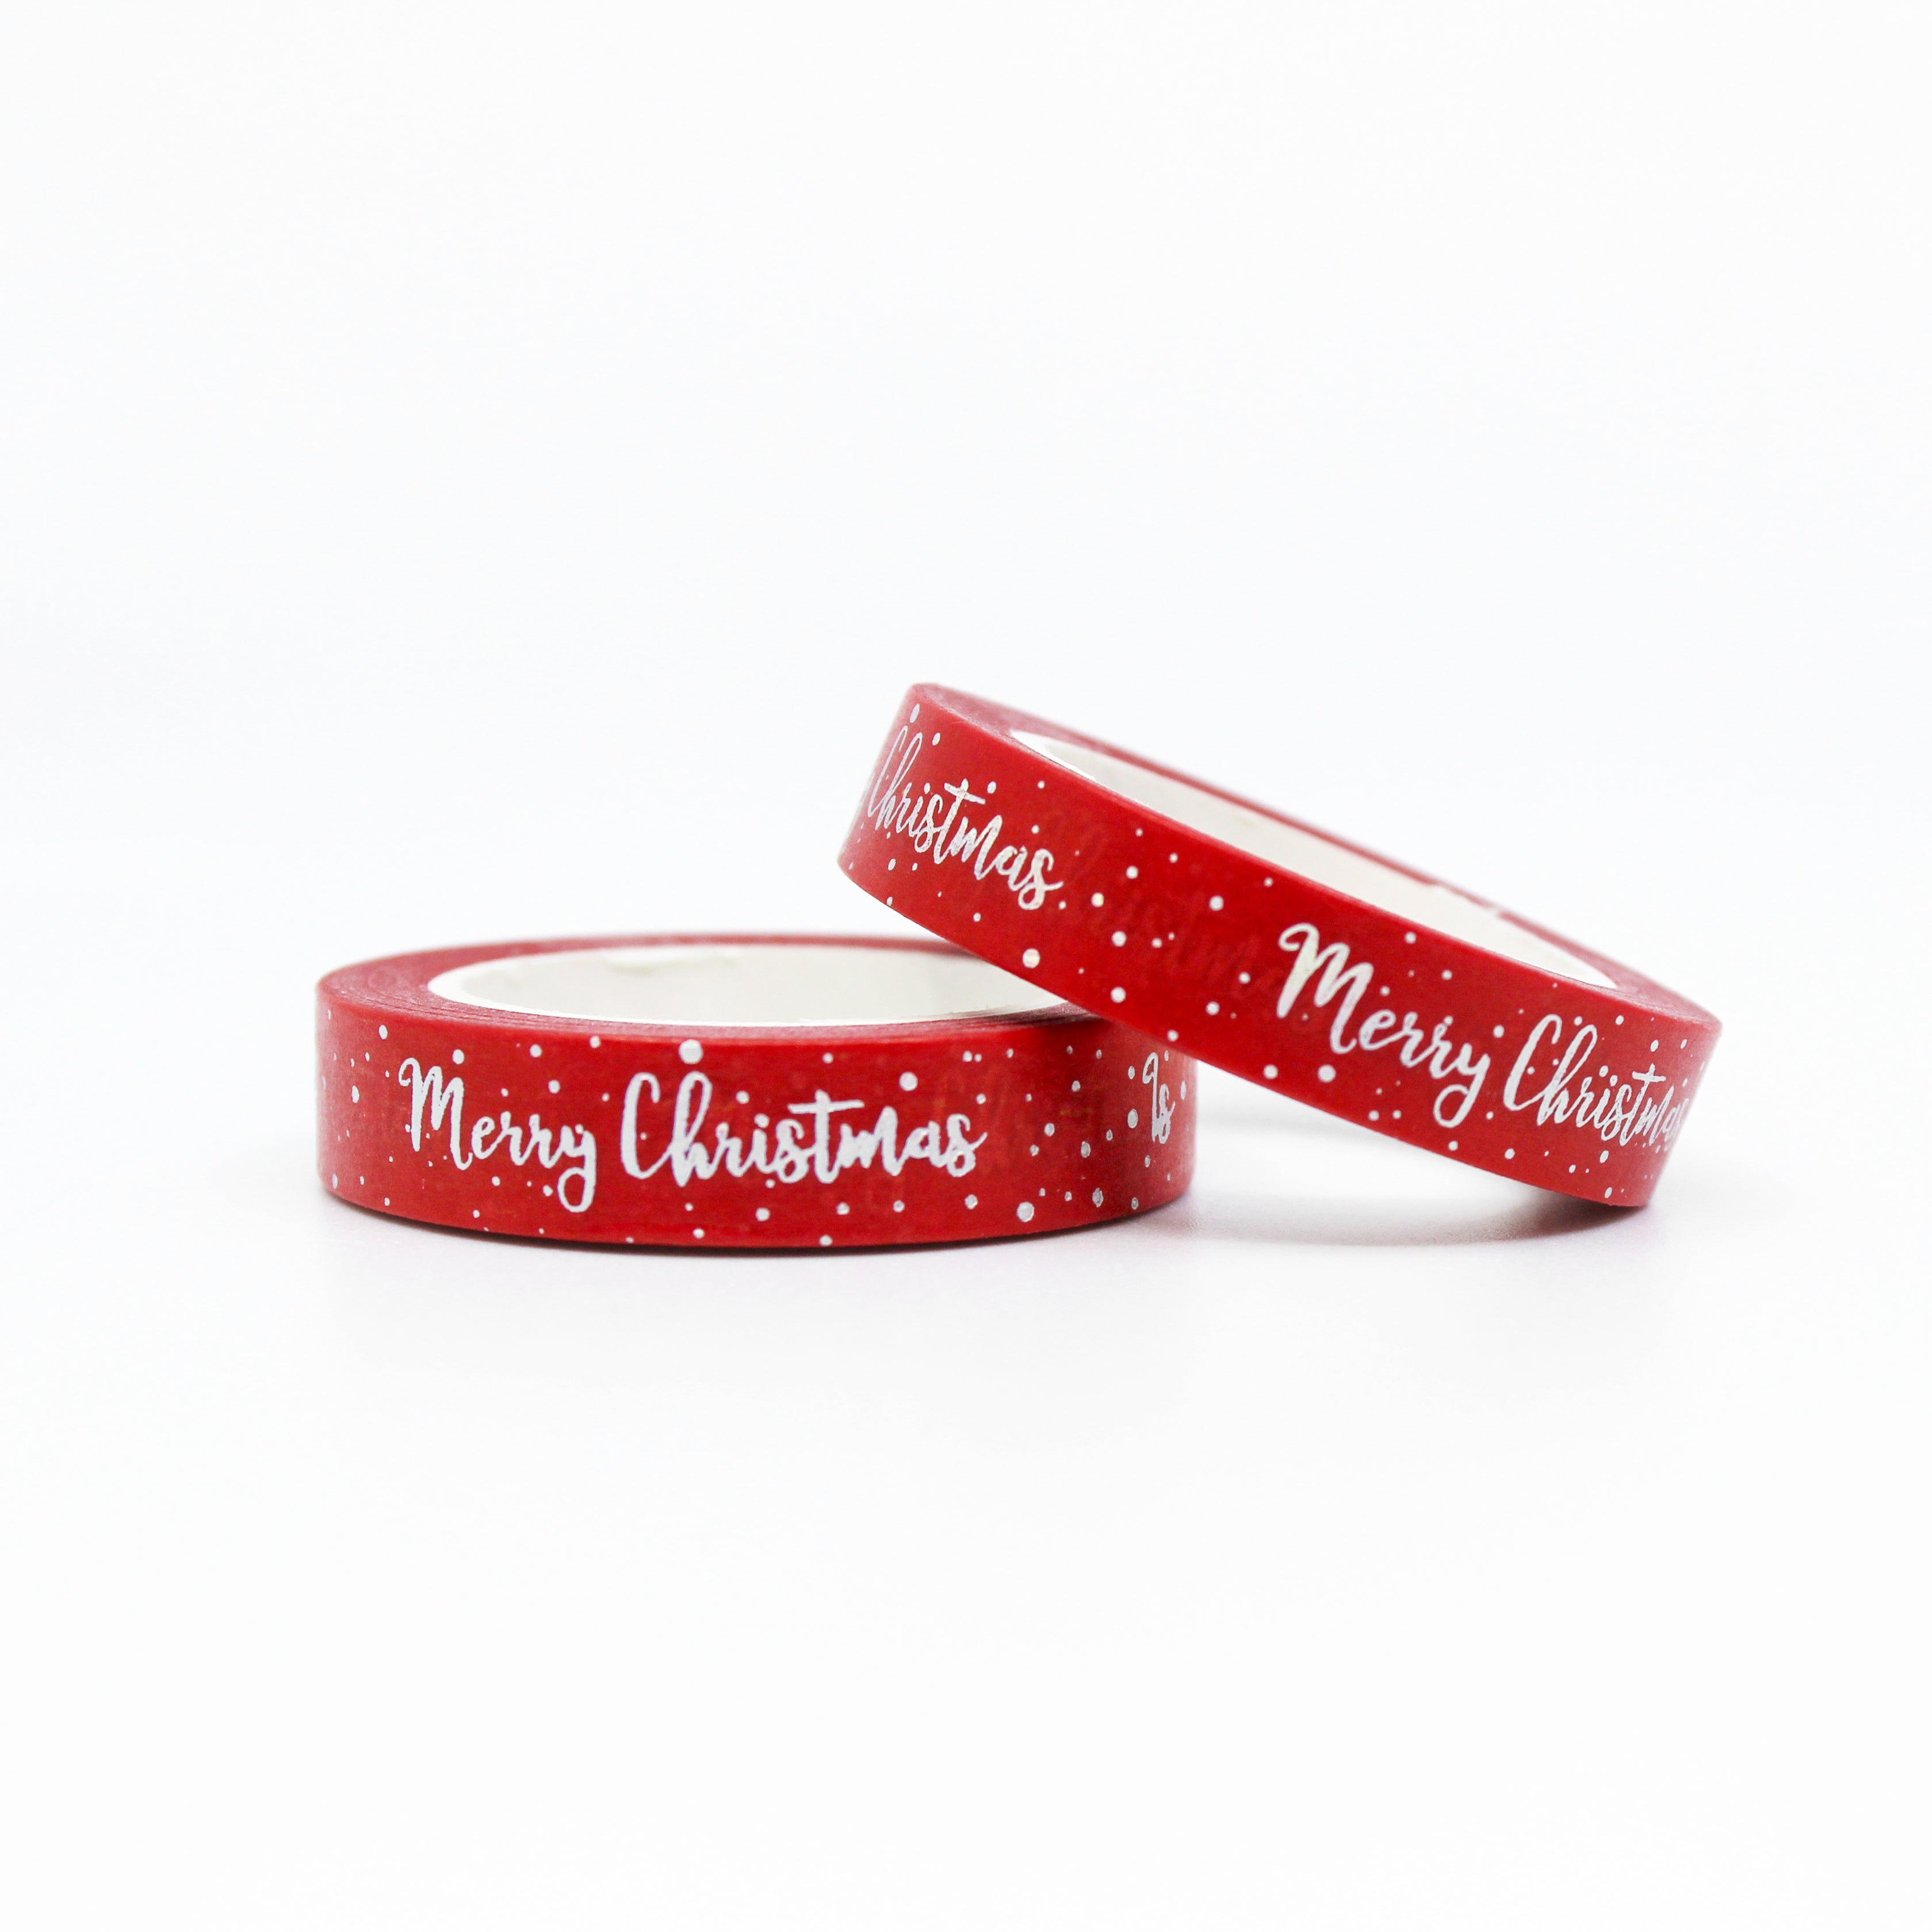 This is a roll of red Merry Christmas washi tapes from BBB Supplies Craft Shop